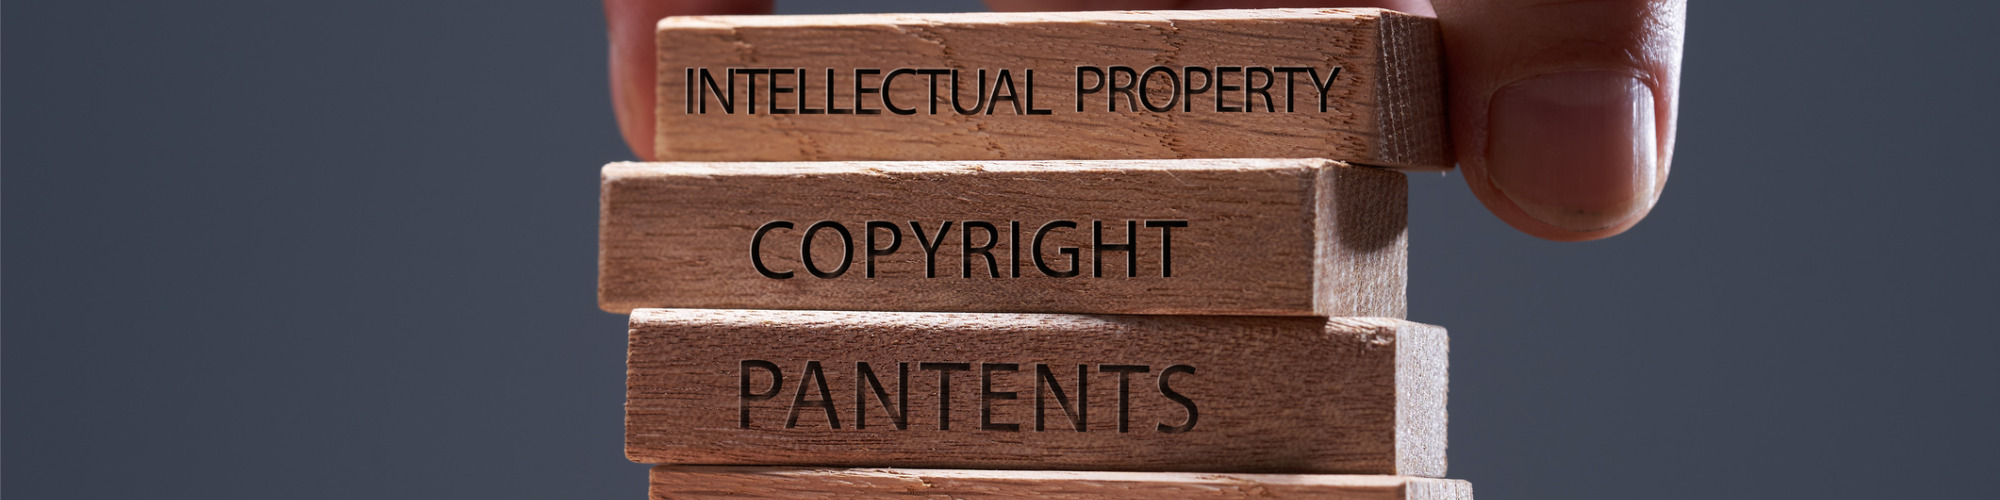 Co-ownership of Intellectual Property Rights in the UK - Avoiding the Pitfalls